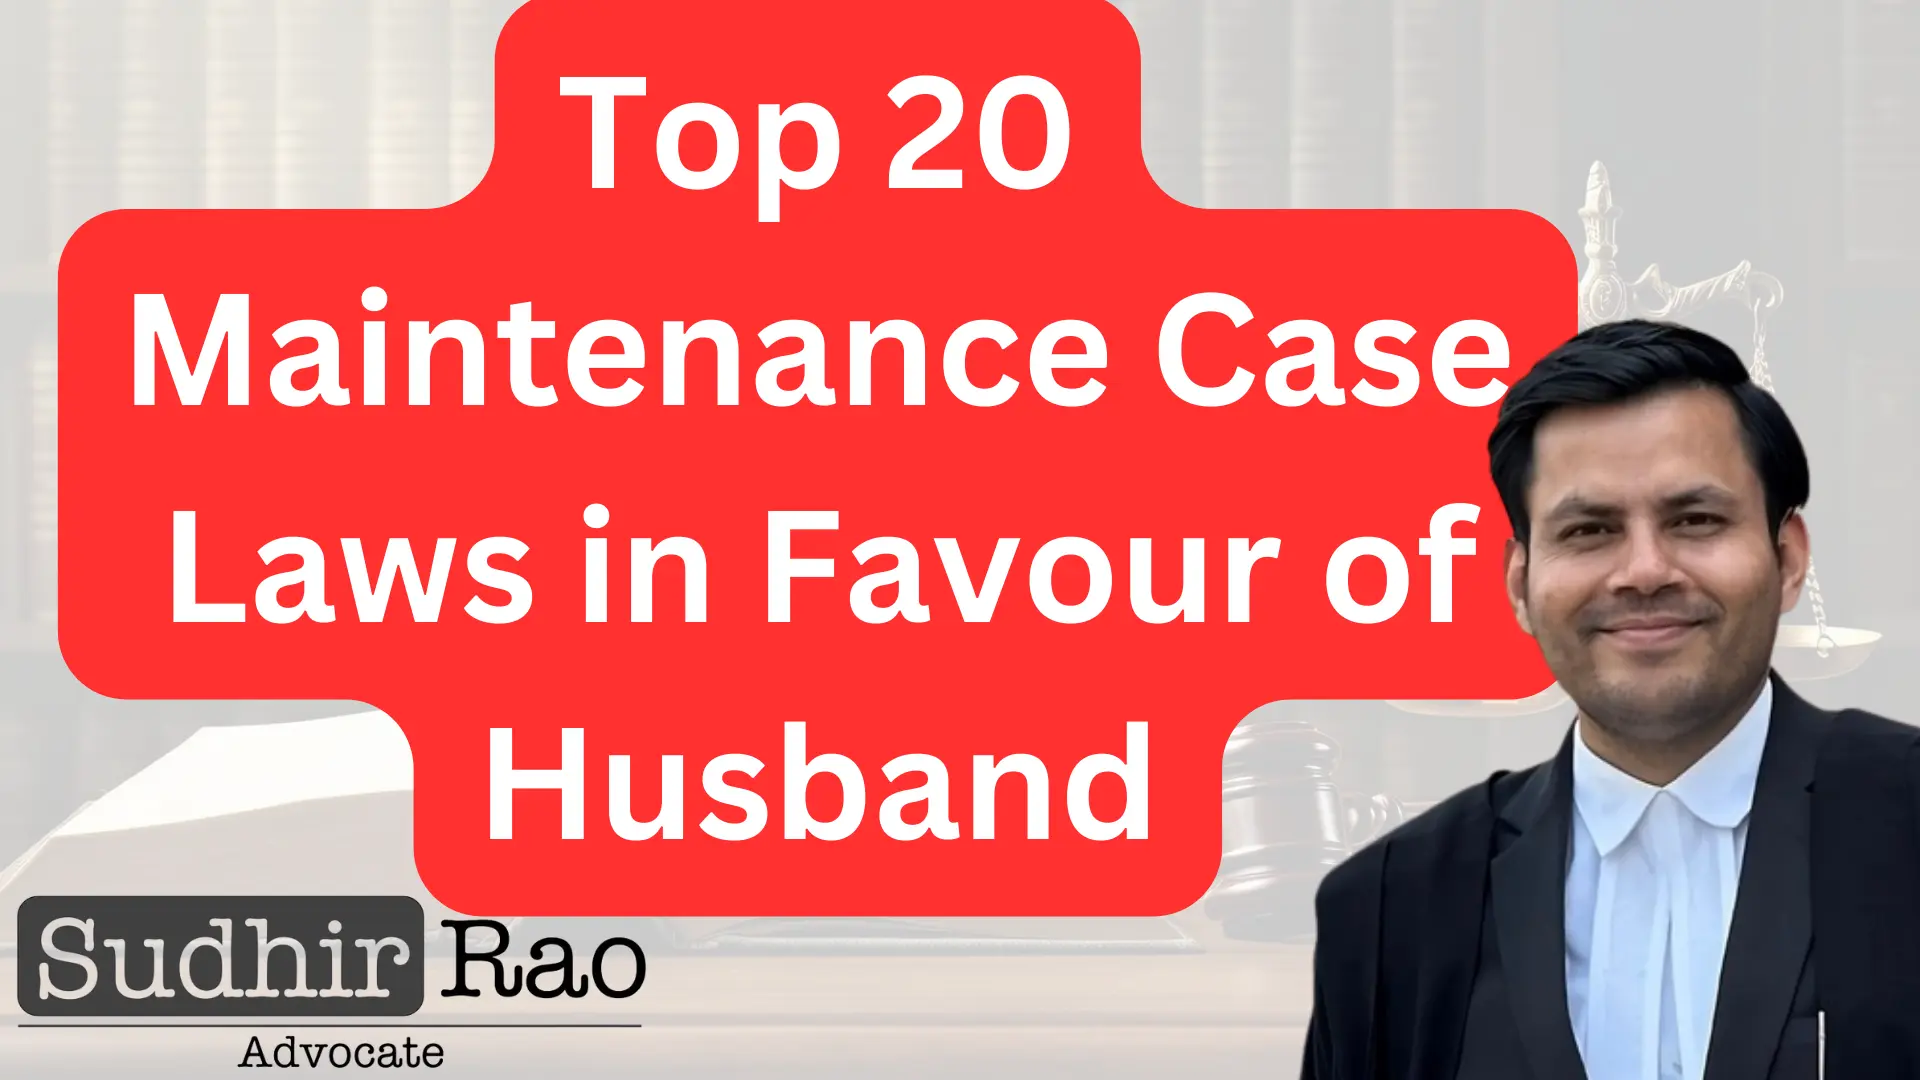 Top 20 Maintenance Case Laws in Favour of Husband